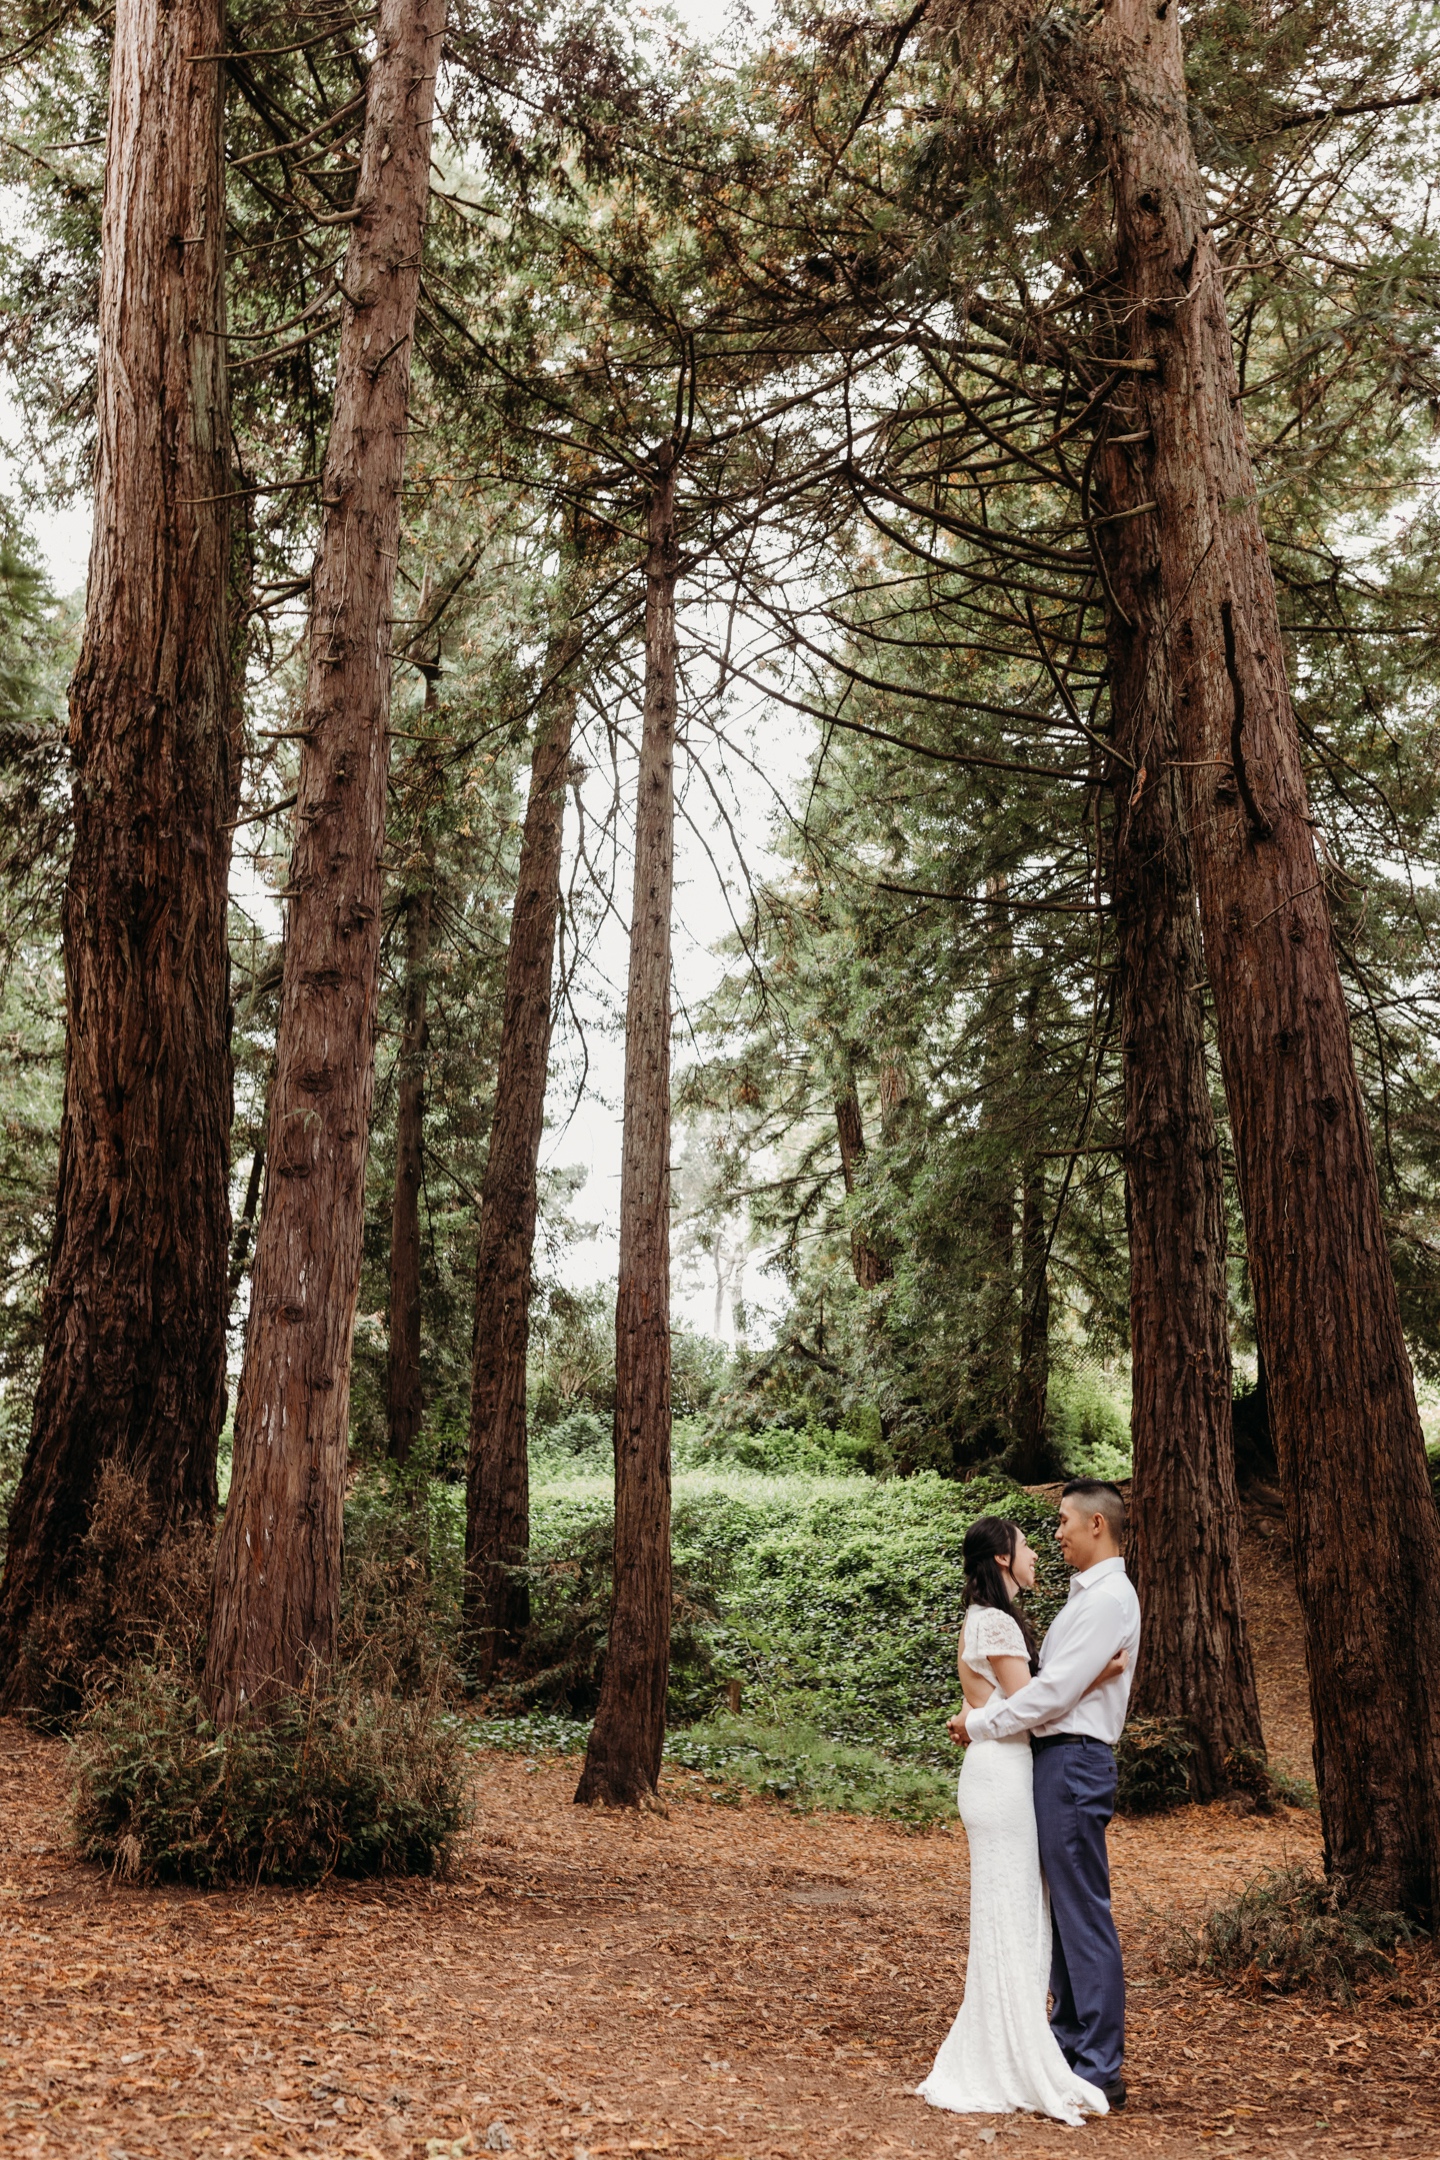 Bride and groom stand in an embrace under the tall Redwood trees in Golden Gate Park.